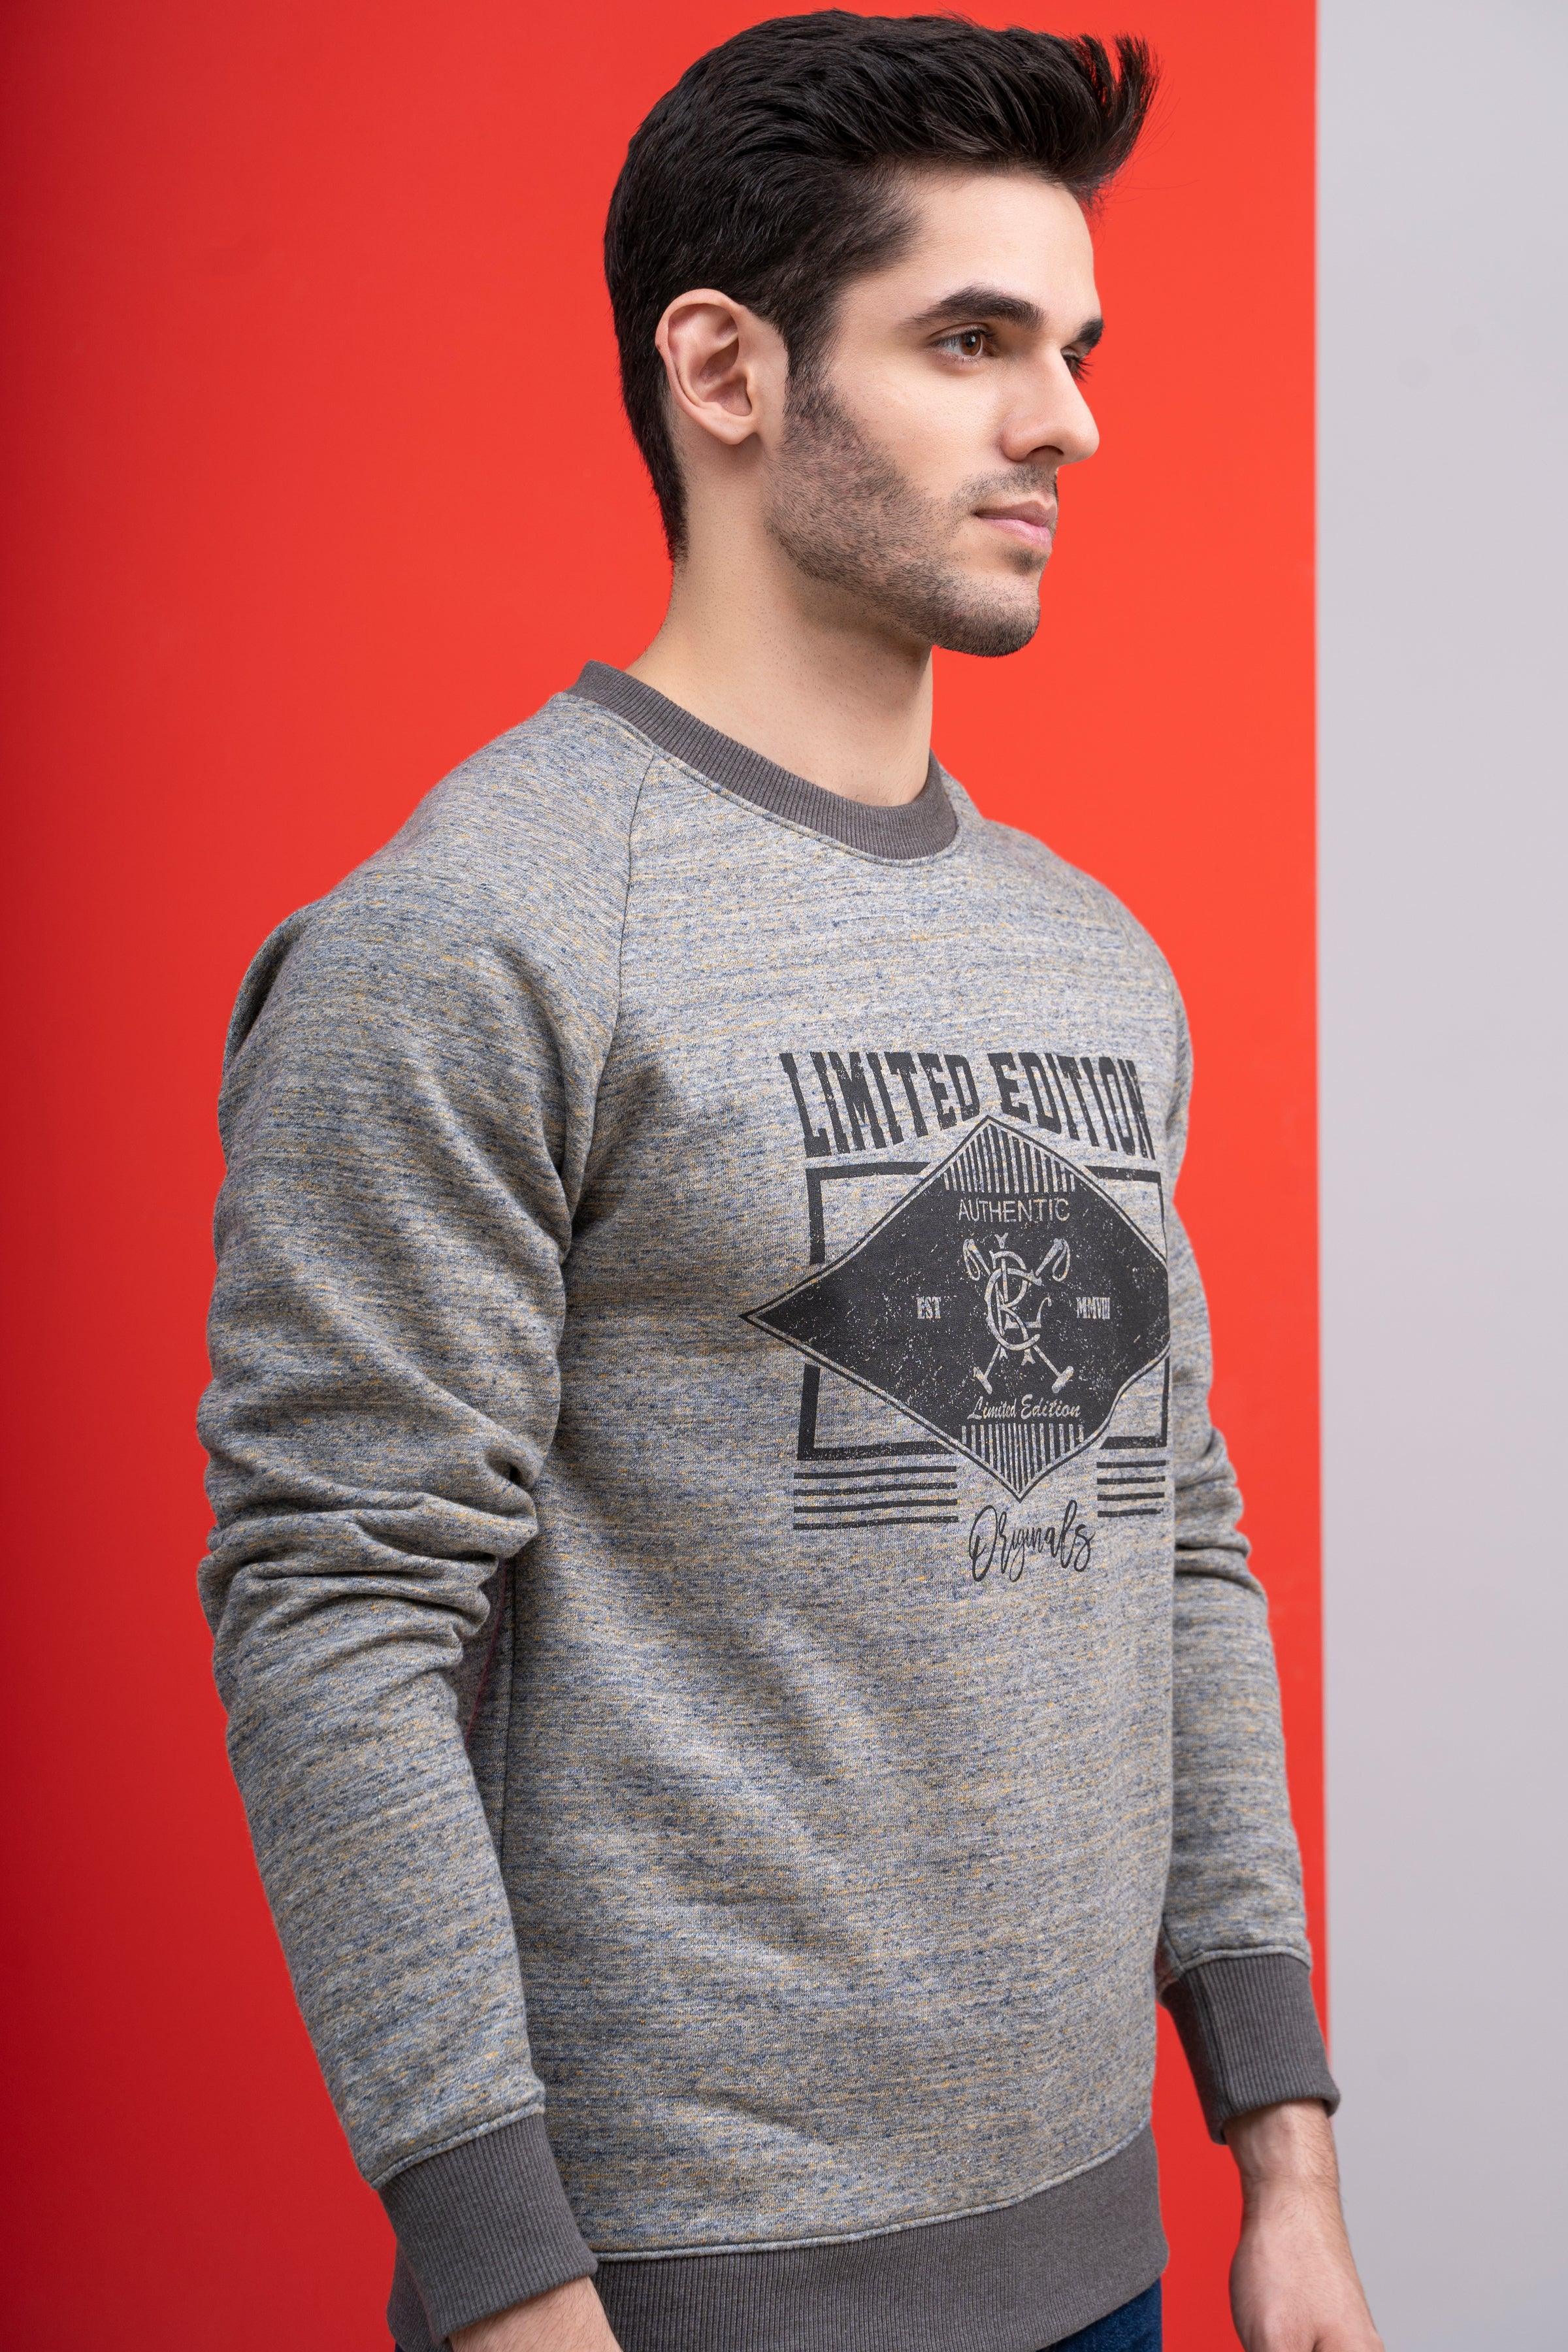 SWEAT SHIRT ROUND NECK F/S GREY at Charcoal Clothing